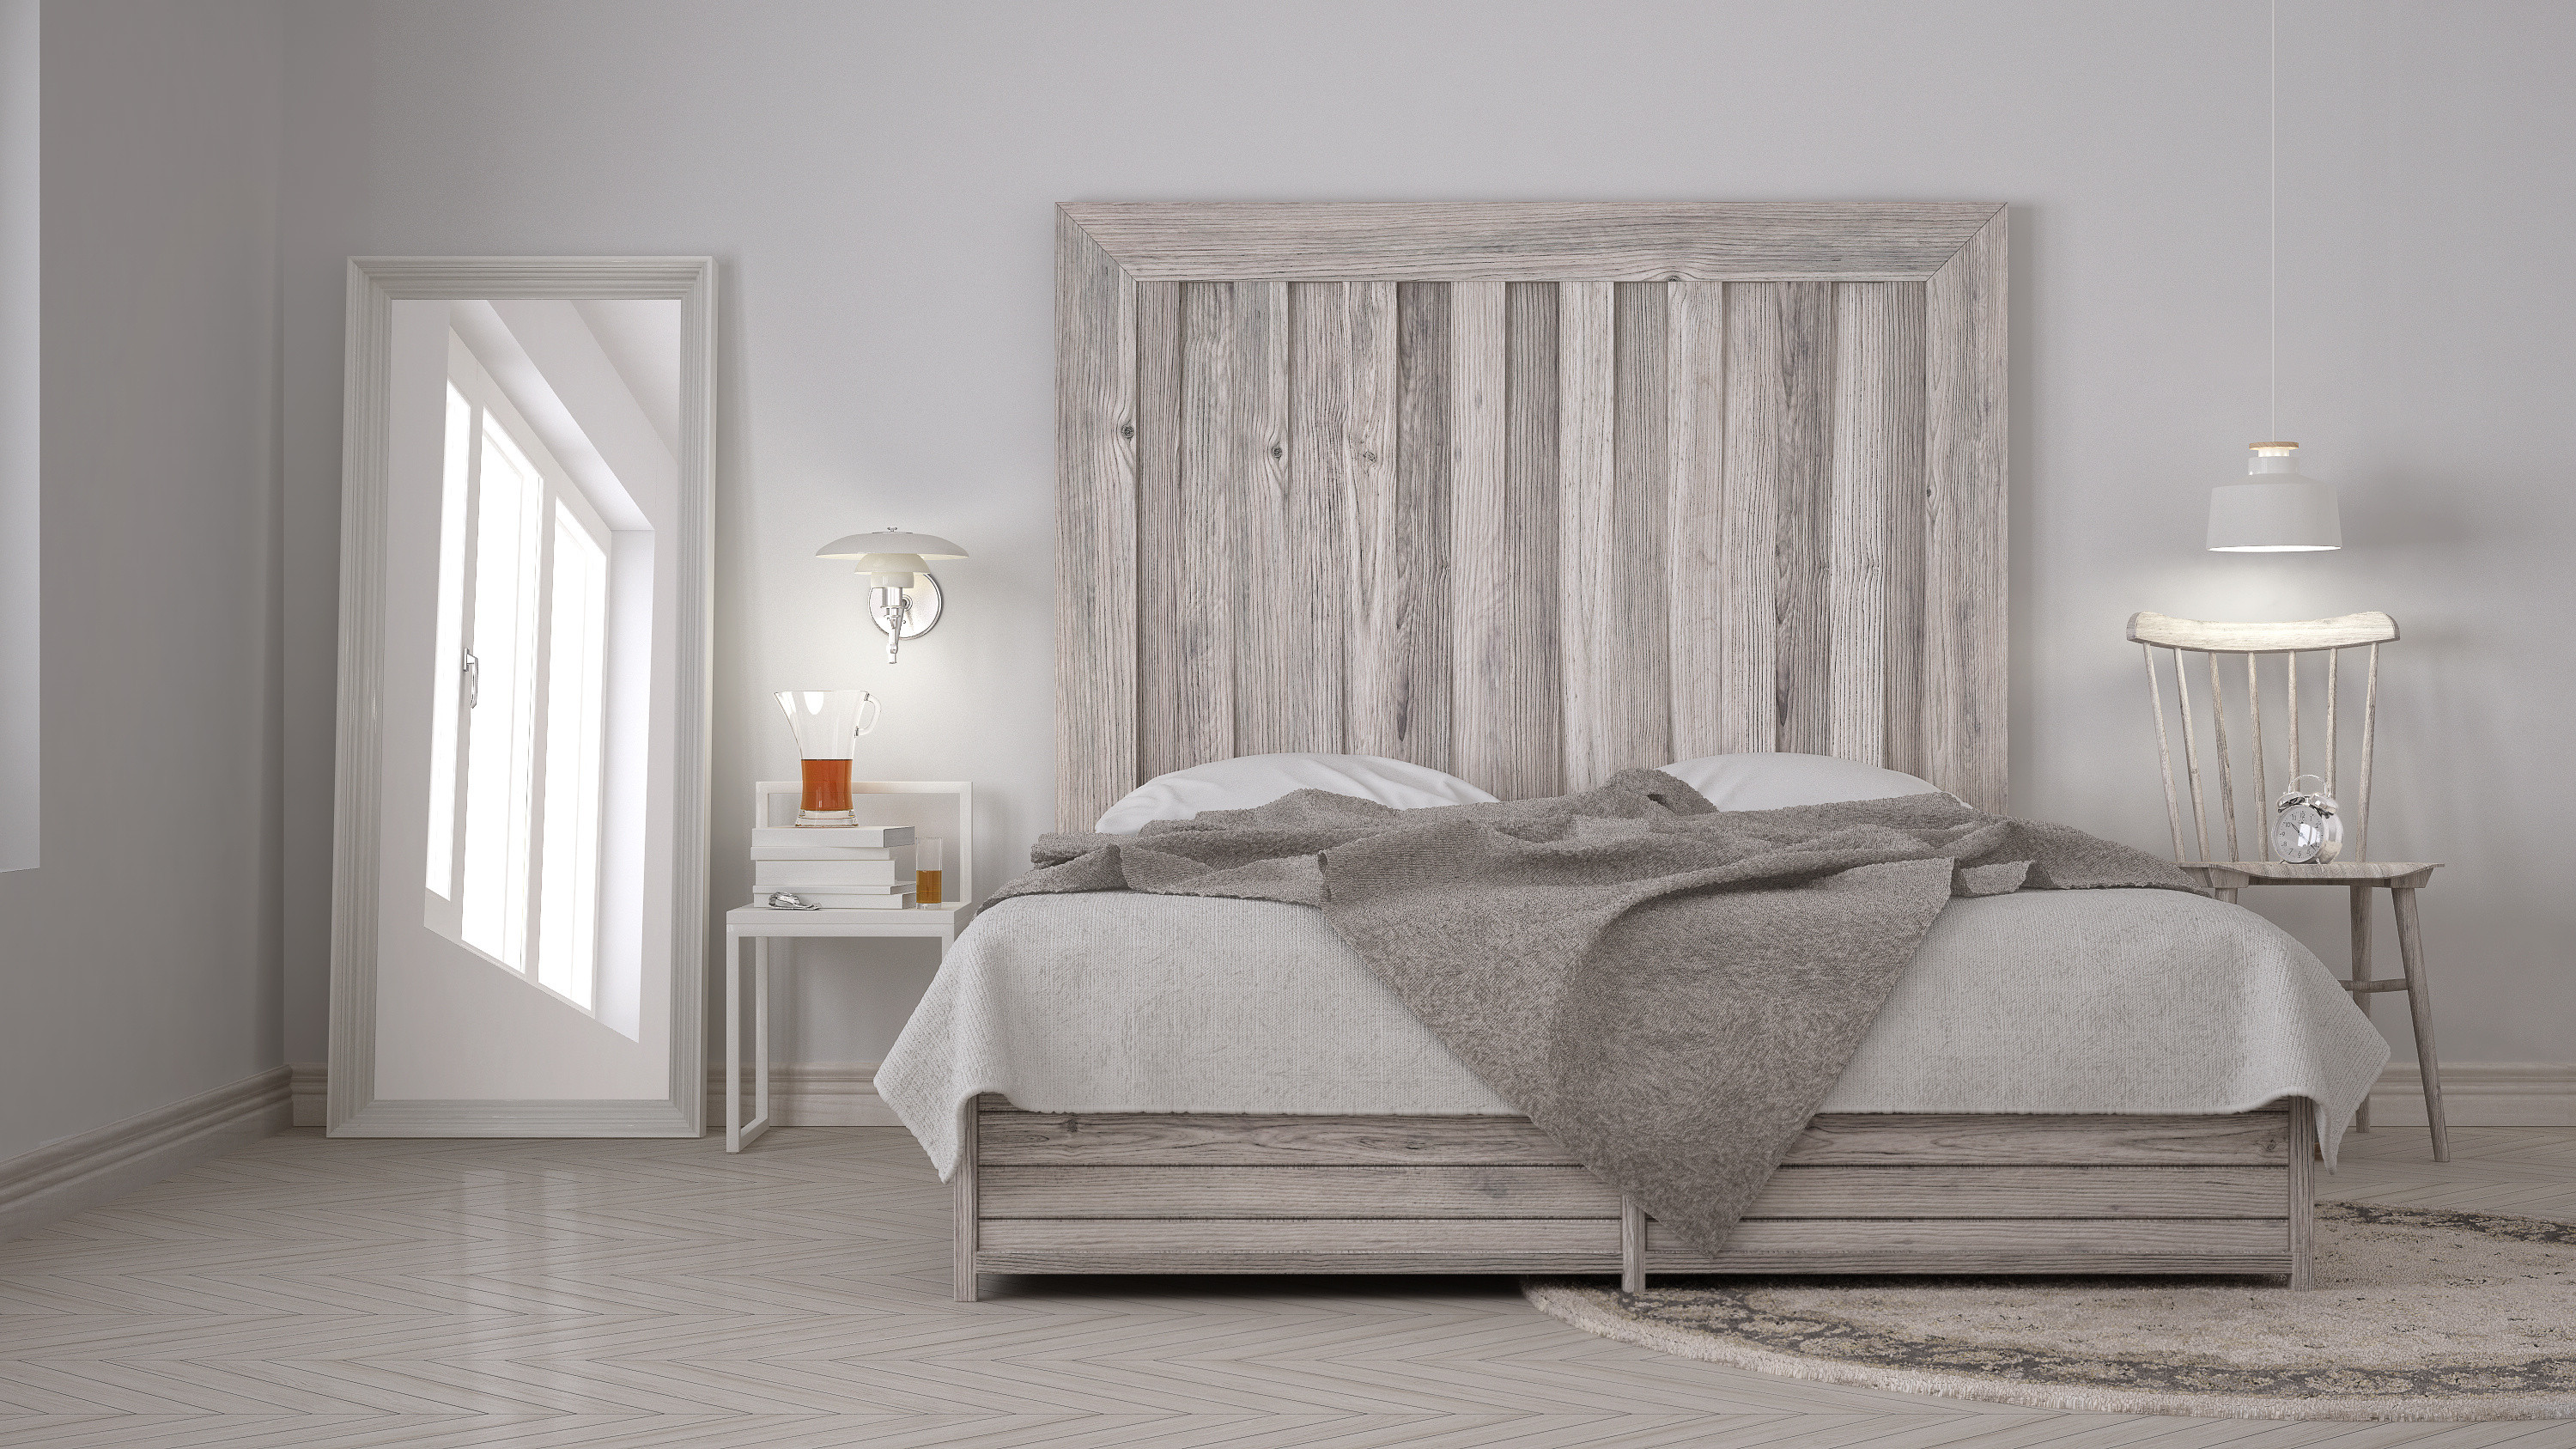 Muted gray wooden bedframe with large matching headboard